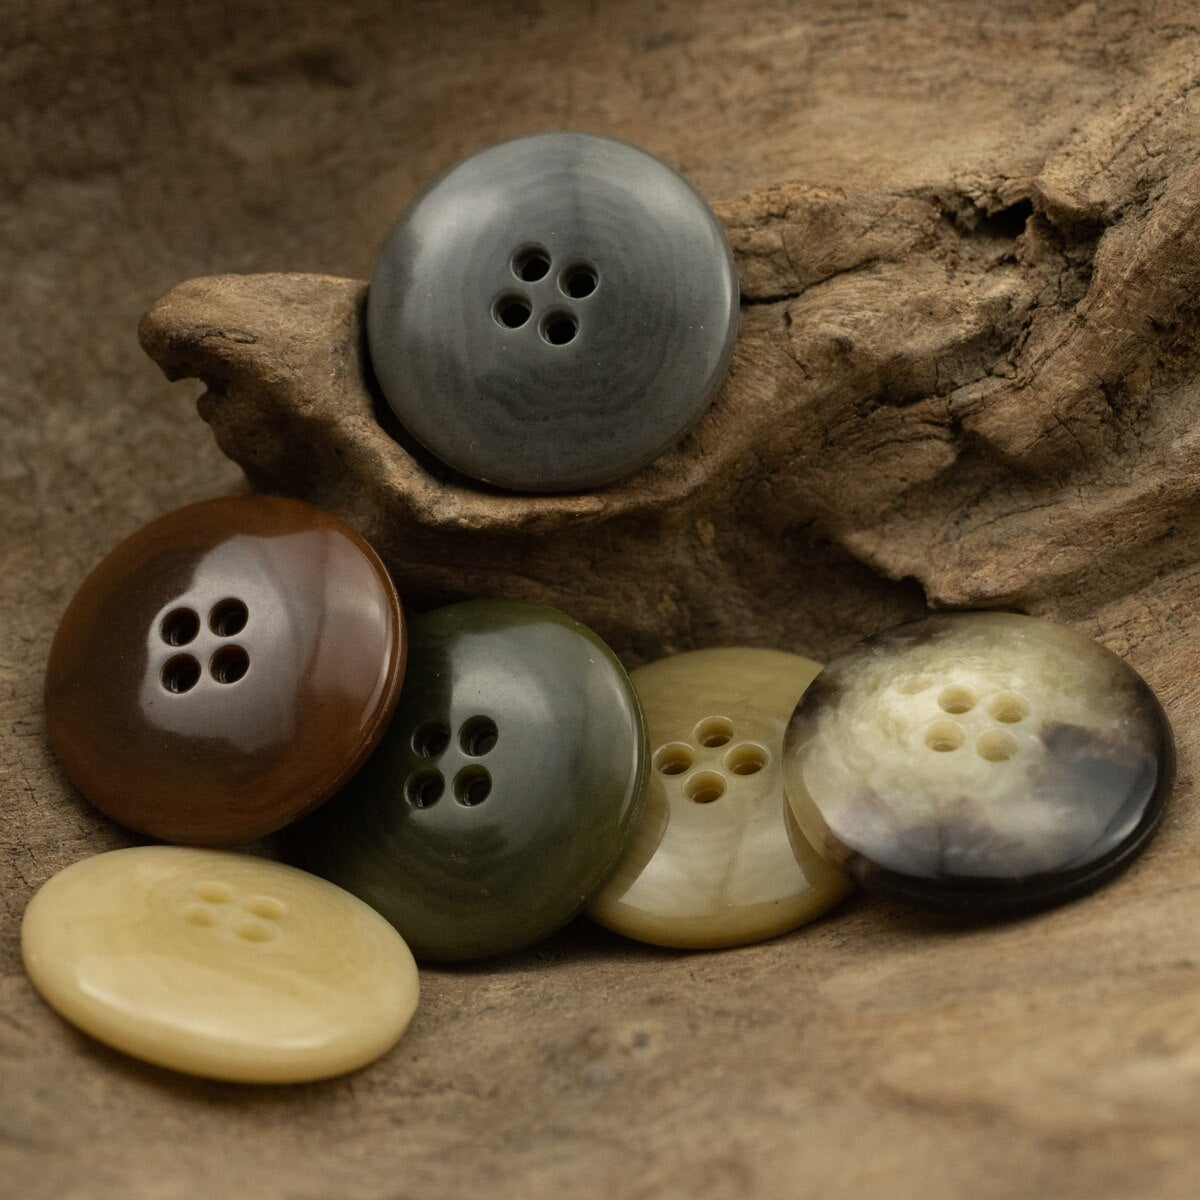 High Quality Urea Buttons 4 Hole Round Imitation Horn and Corozo Buttons